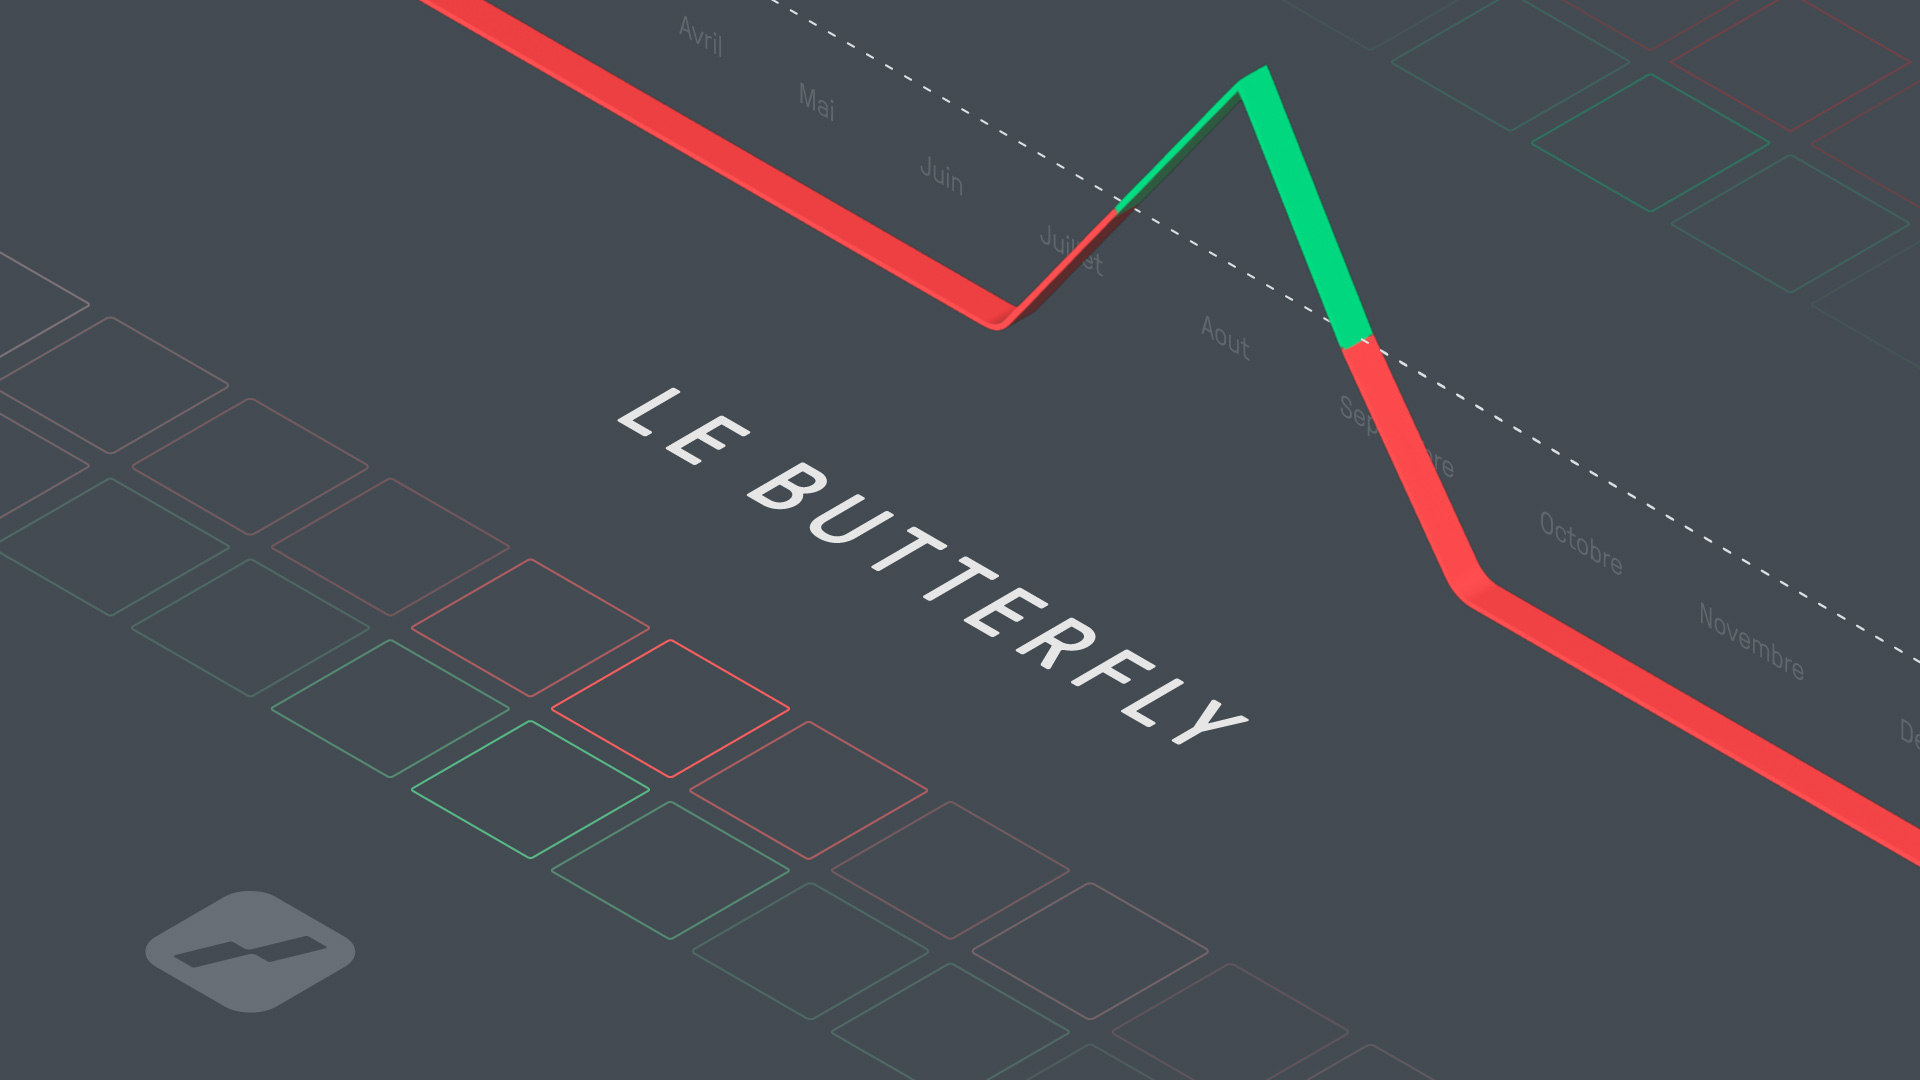 butterfly option - butterfly option strategy - featured image